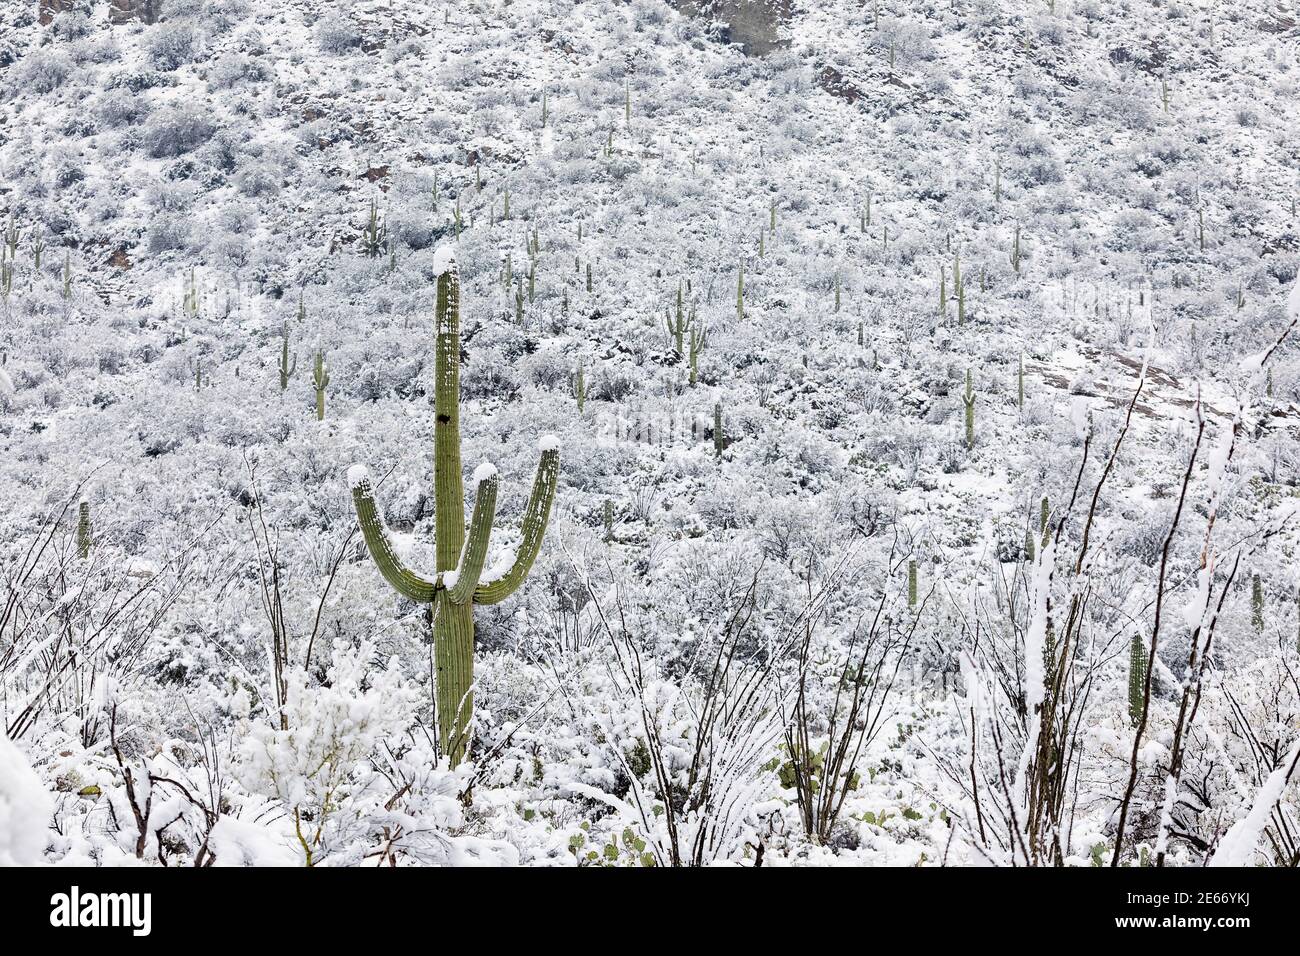 Snow on a Saguaro Cactus in the desert after a winter storm in Saguaro National Park, Tucson, Arizona Stock Photo